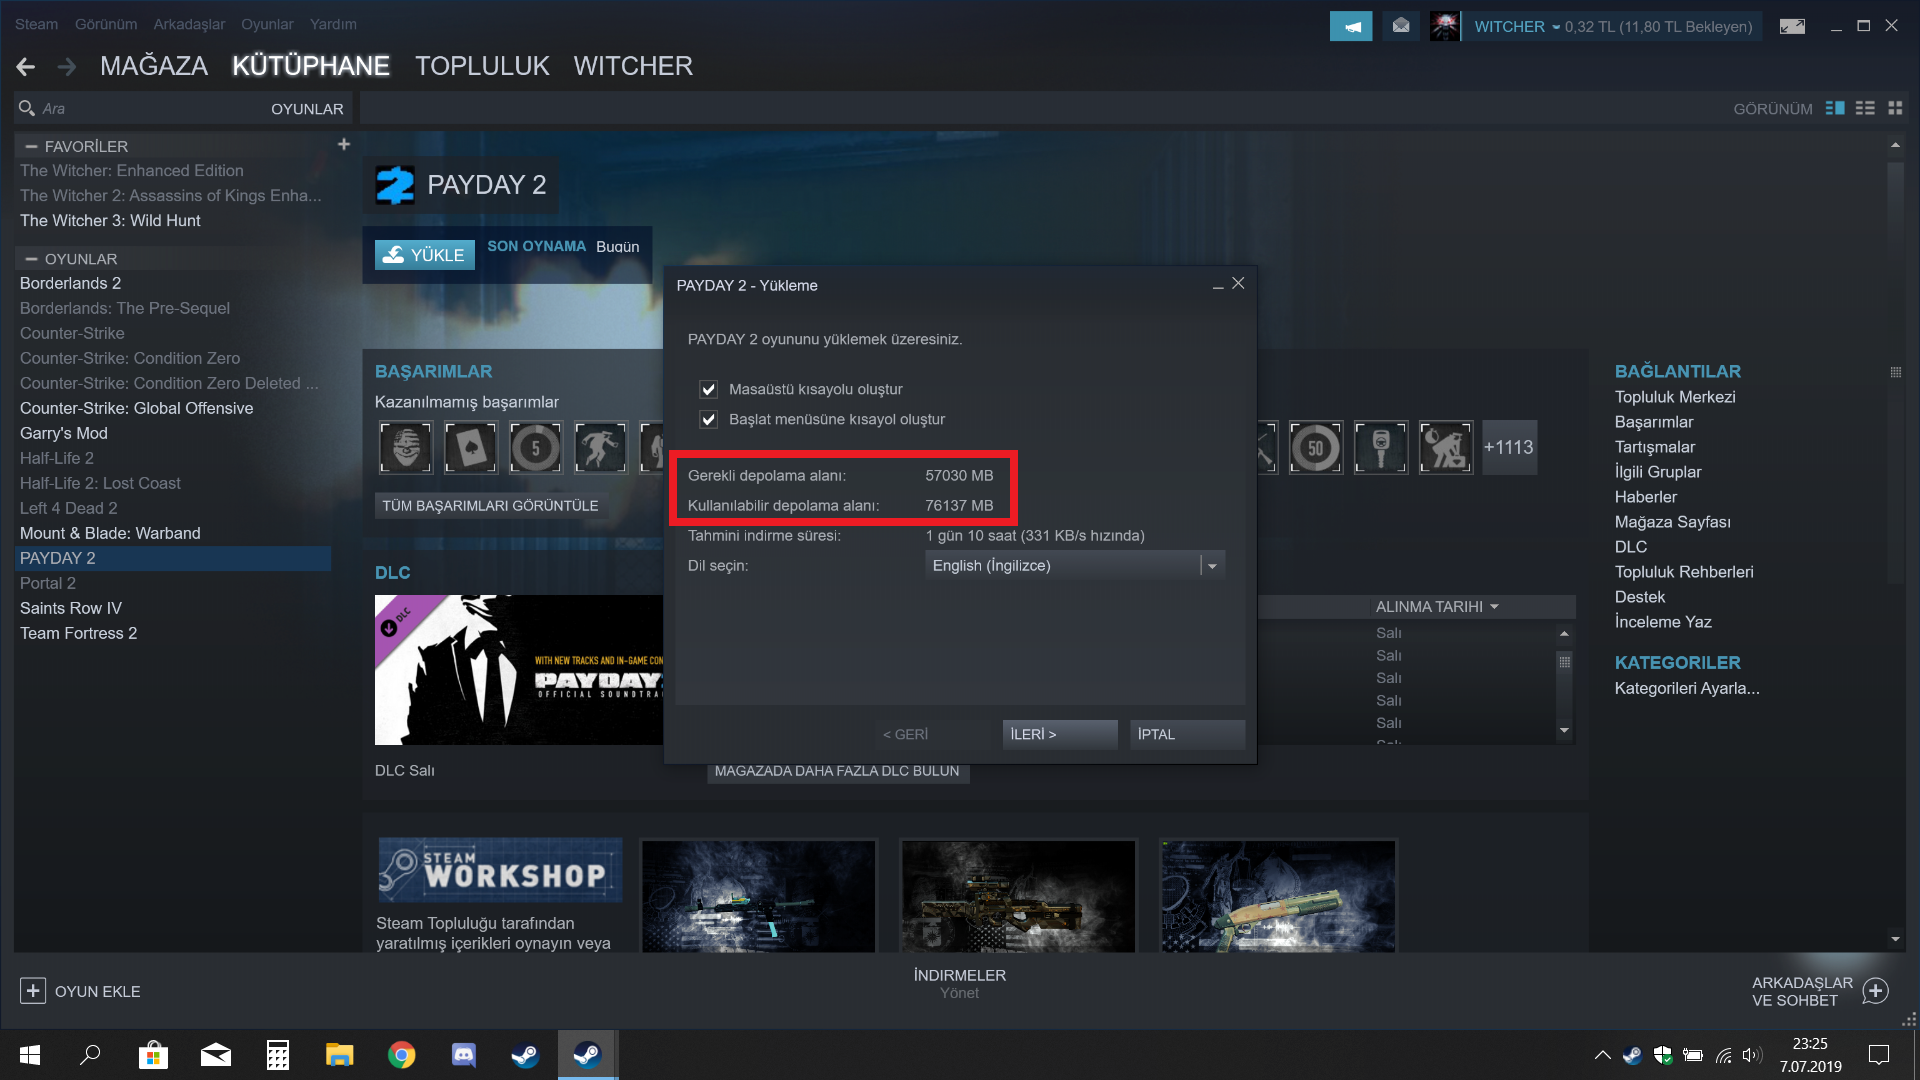 Steam error steam must be running to play this game payday 2 что делать фото 104